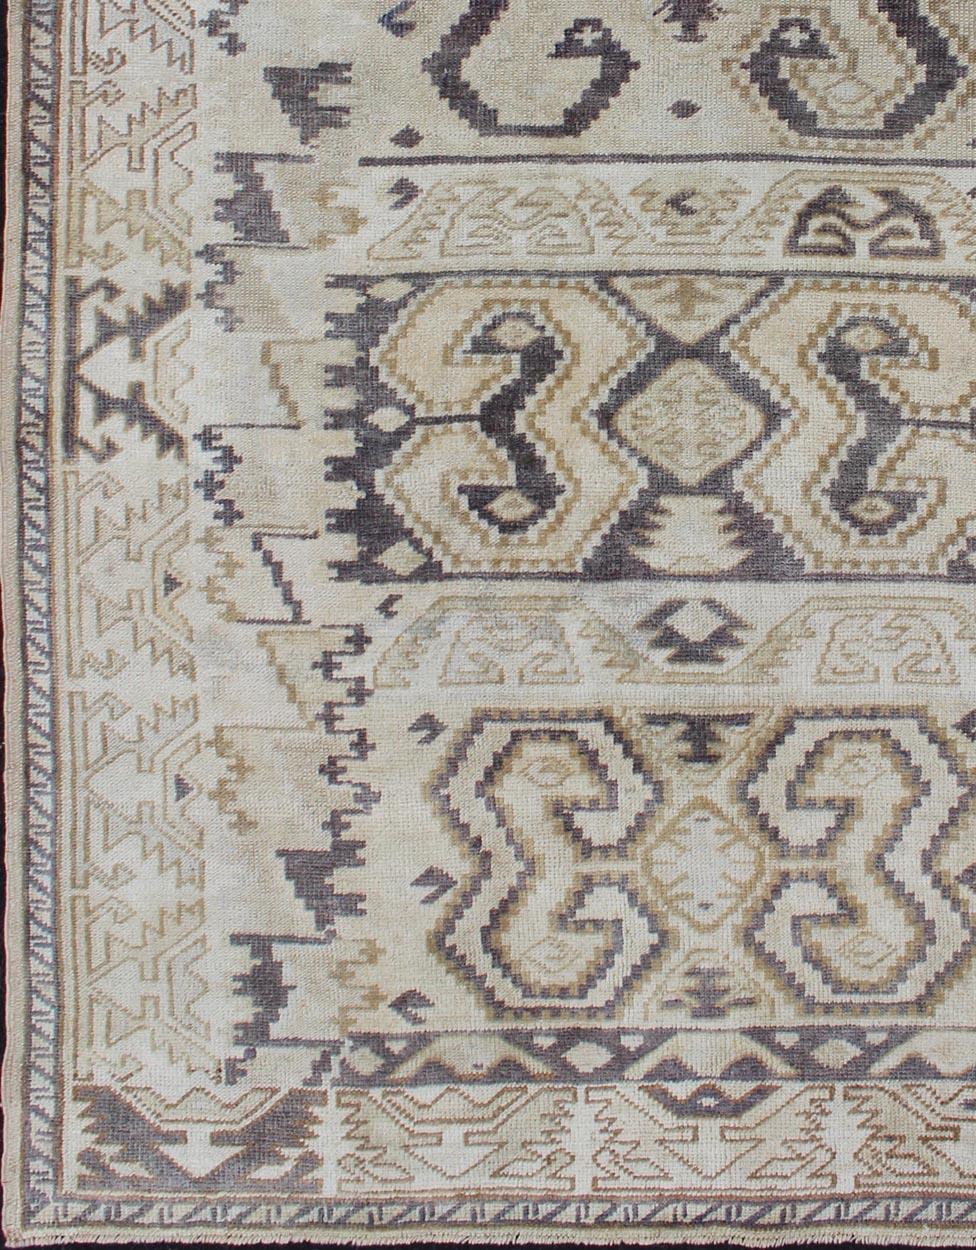 Tribal Oushak carpet in taupe and gray-purple, rug en-92818, country of origin / type: Turkey / Oushak, circa 1930

The Oushak rug from Turkey was handwoven in the 1930s and features a design unique to that of other Oushaks of this time. Rendered